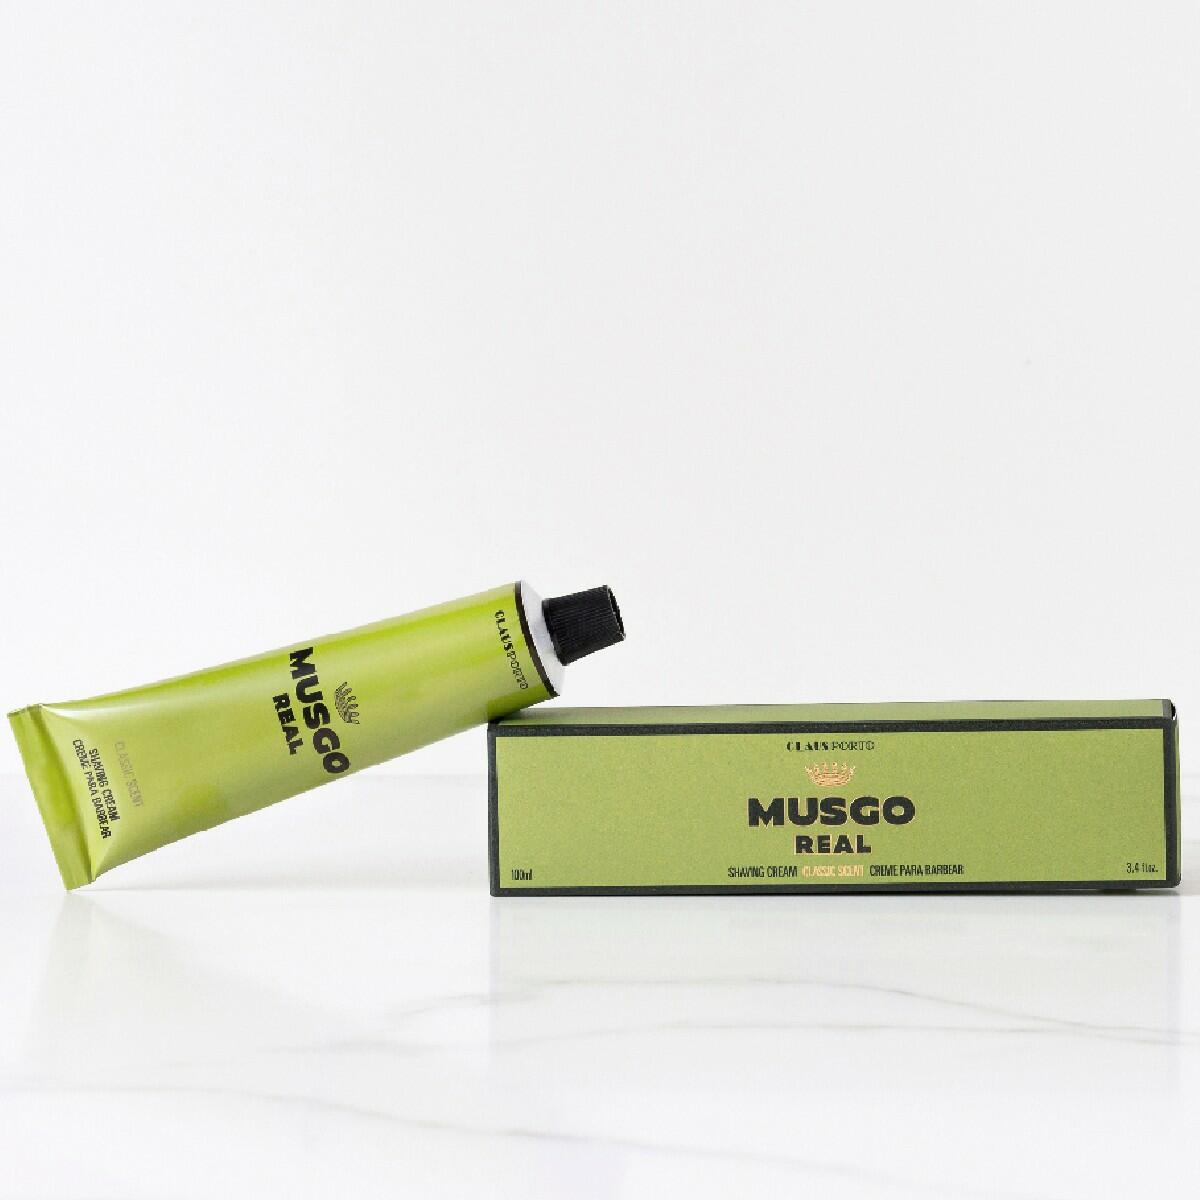 Musgo Real Classic Scent